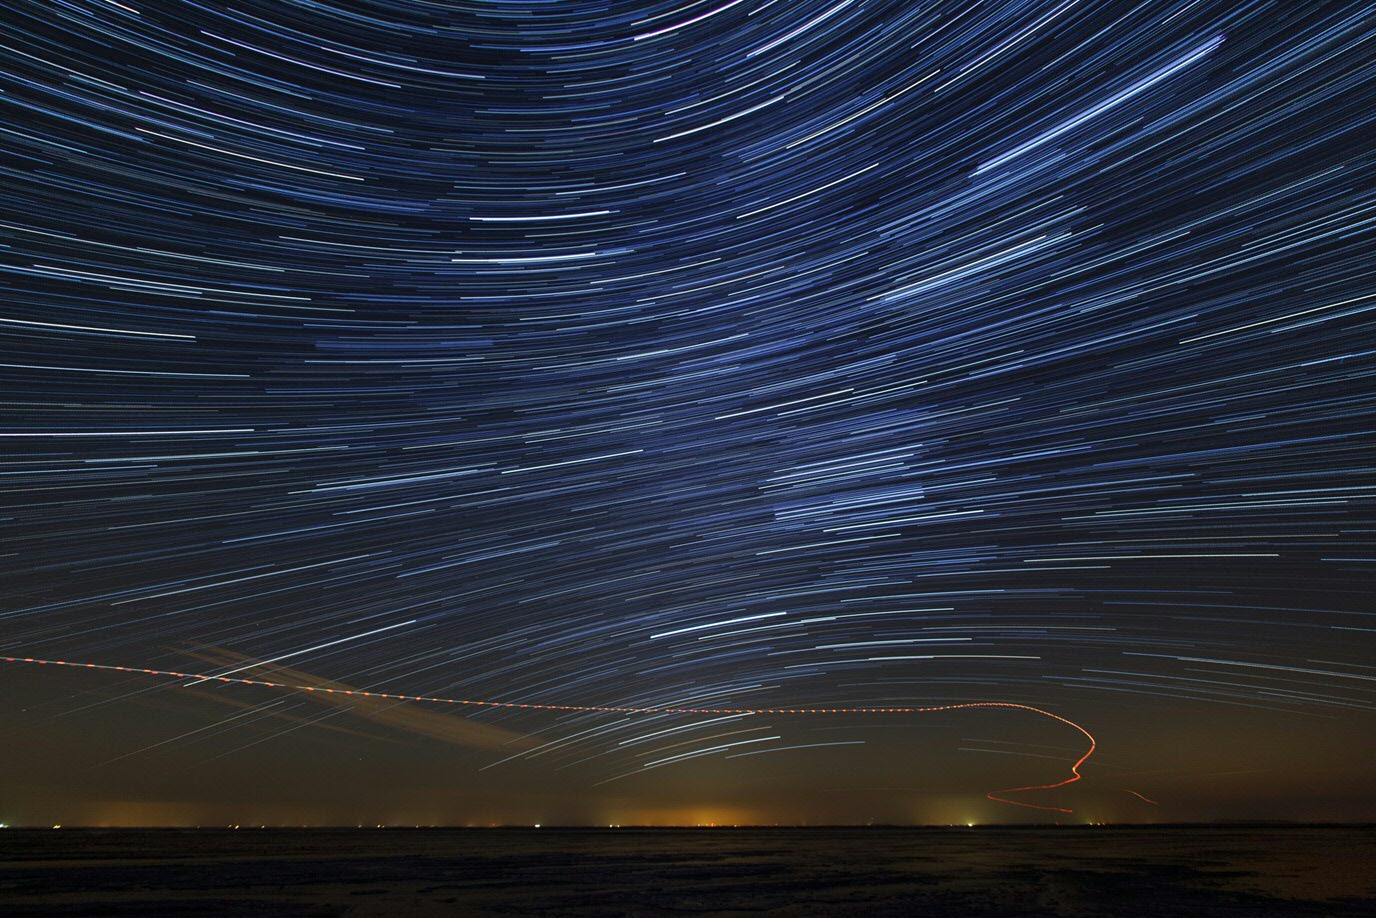 Ameland star trails and helicopter track (Photo by Johan van der Wielen)